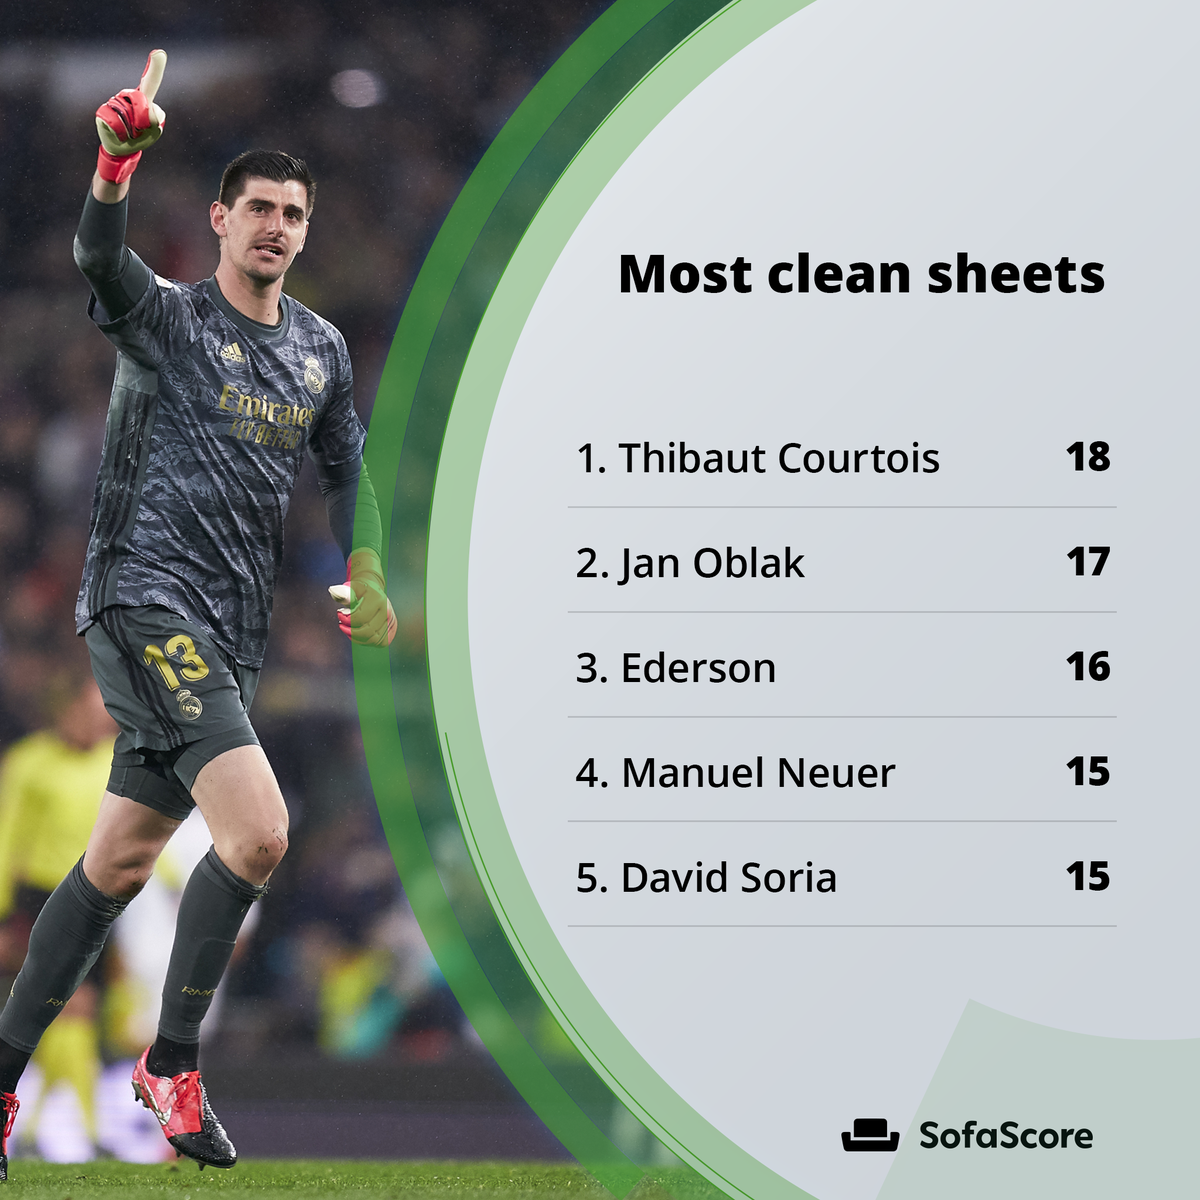 LaLiga goalkeepers were mightly impressive this season, as Thibaut Courtois, Jan Oblak and David Soria are among clean sheets leaders, while Aitor Fernández made the most saves across the top 5 leagues.It's clearly good to be a goalkeeper in Spain!